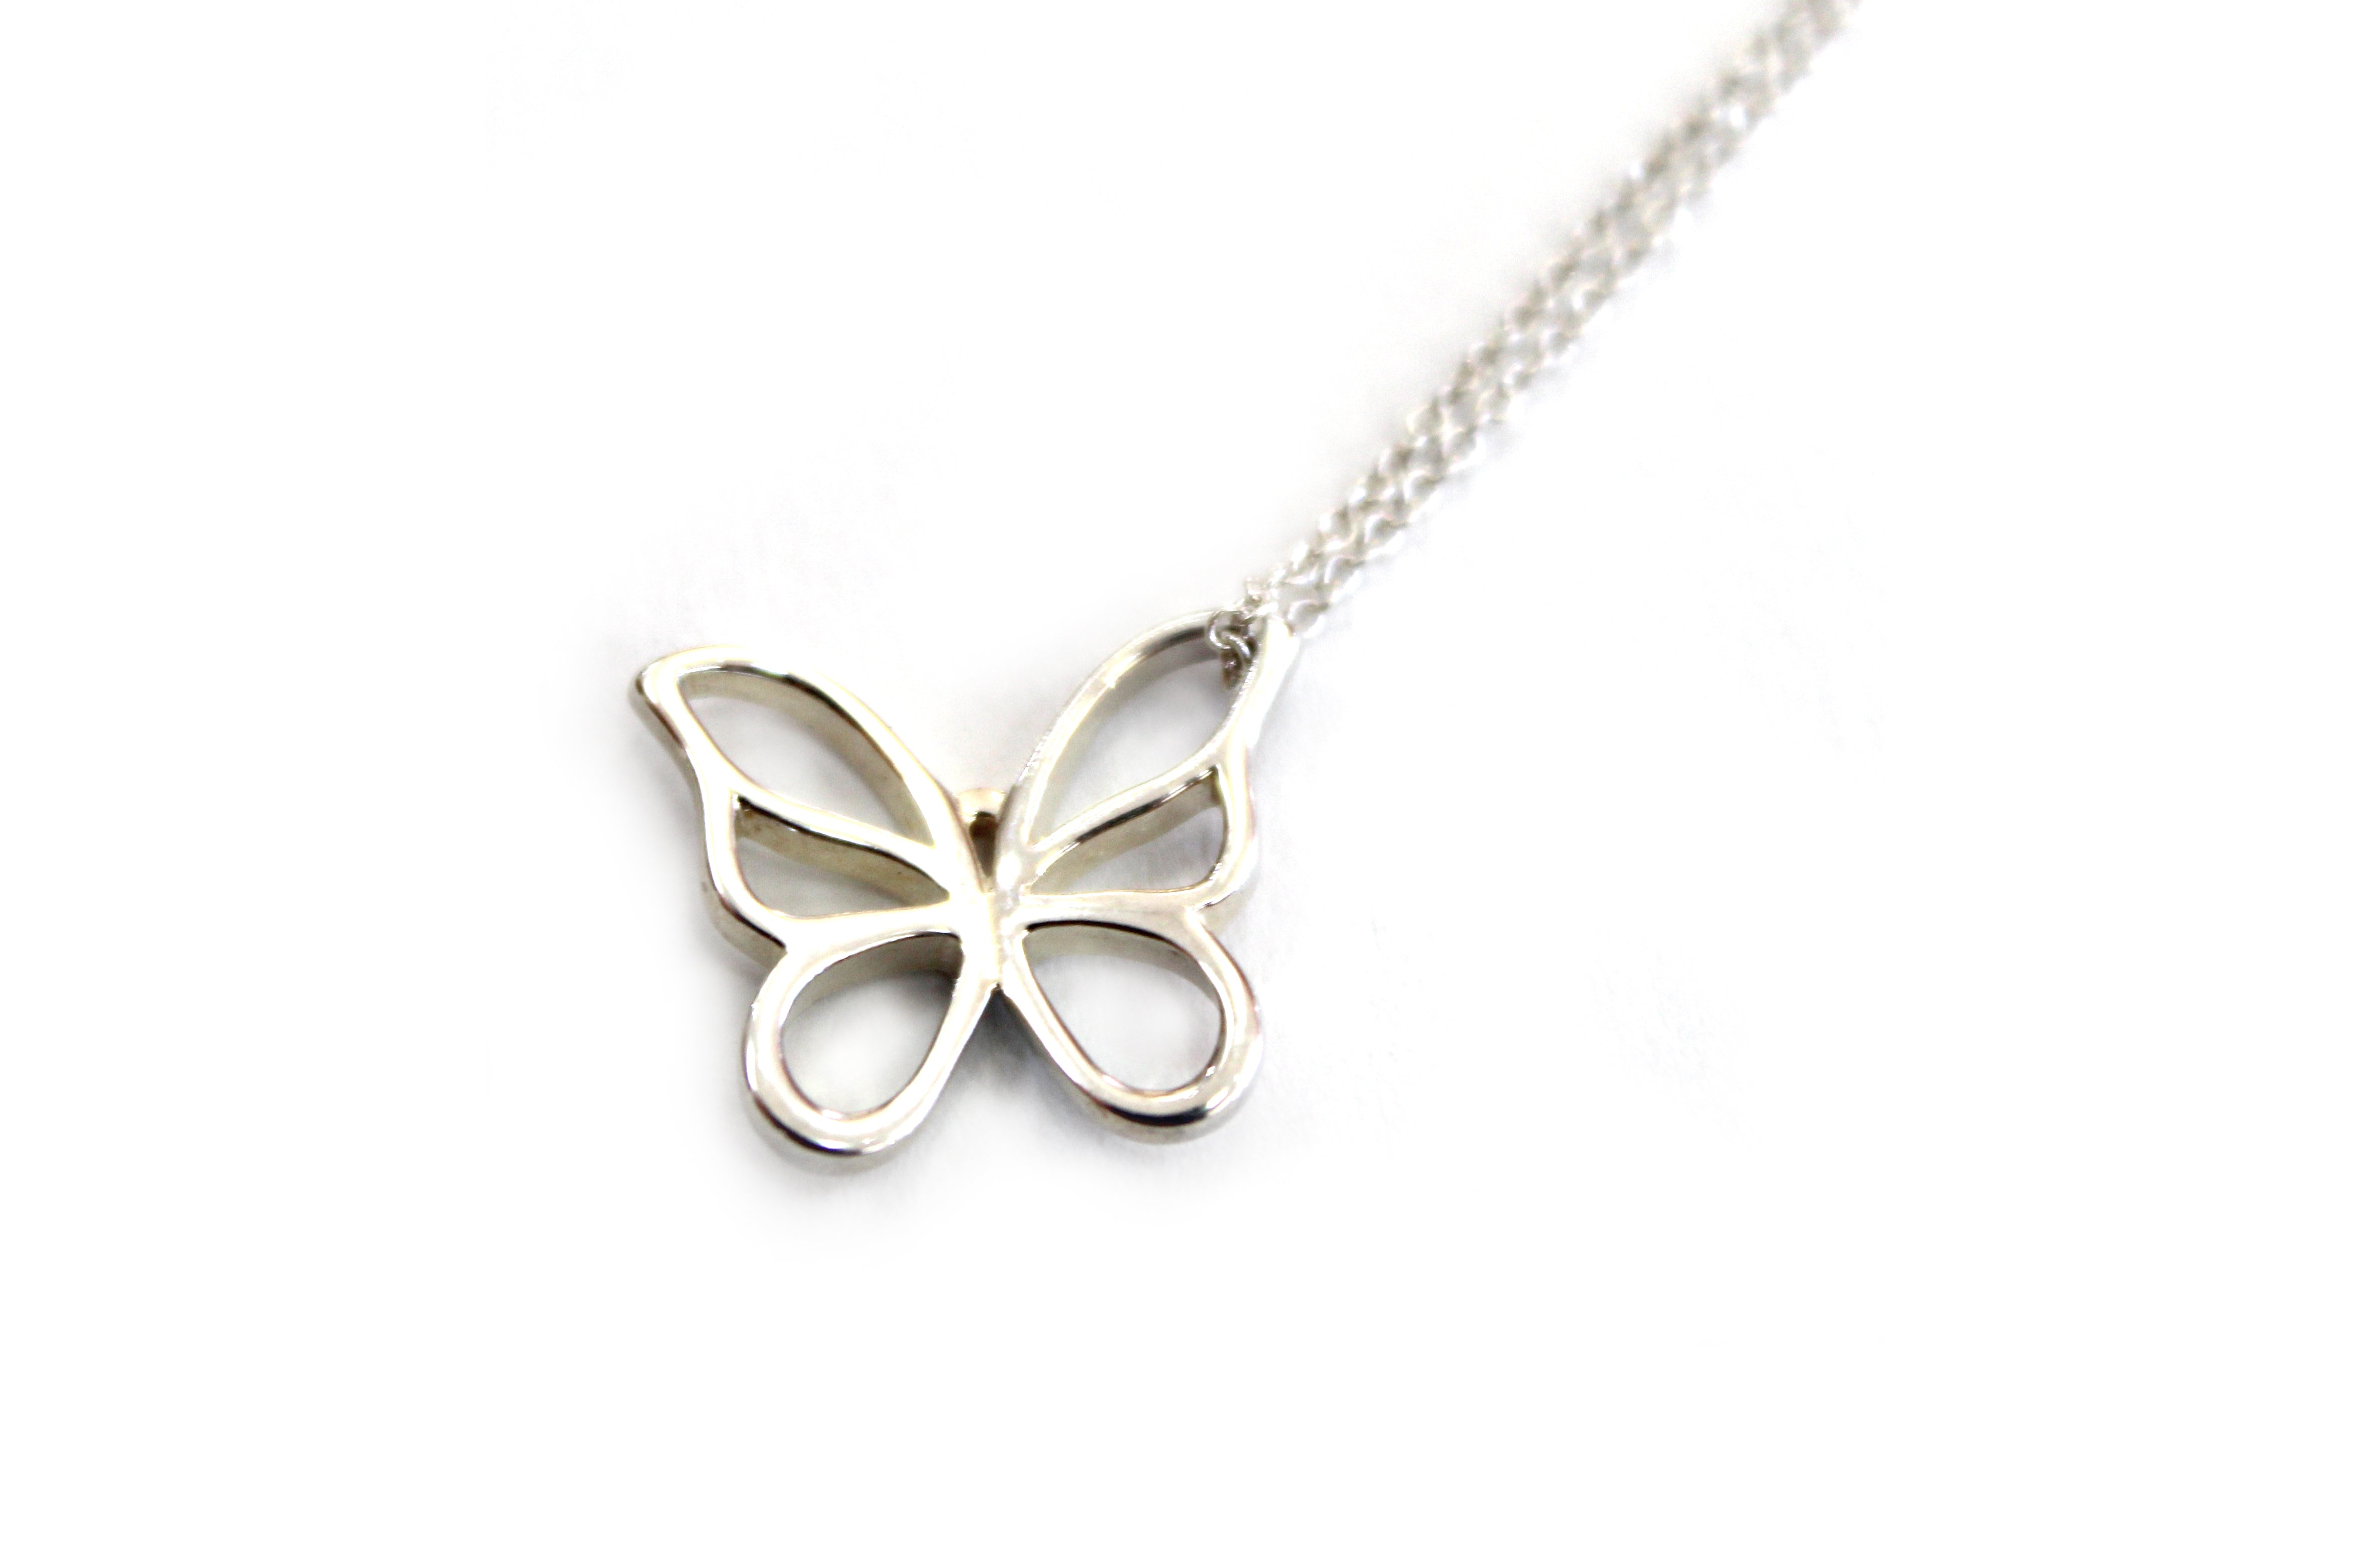 Authentic Tiffany & Co. Sterling Silver Butterfly Pendant Necklace